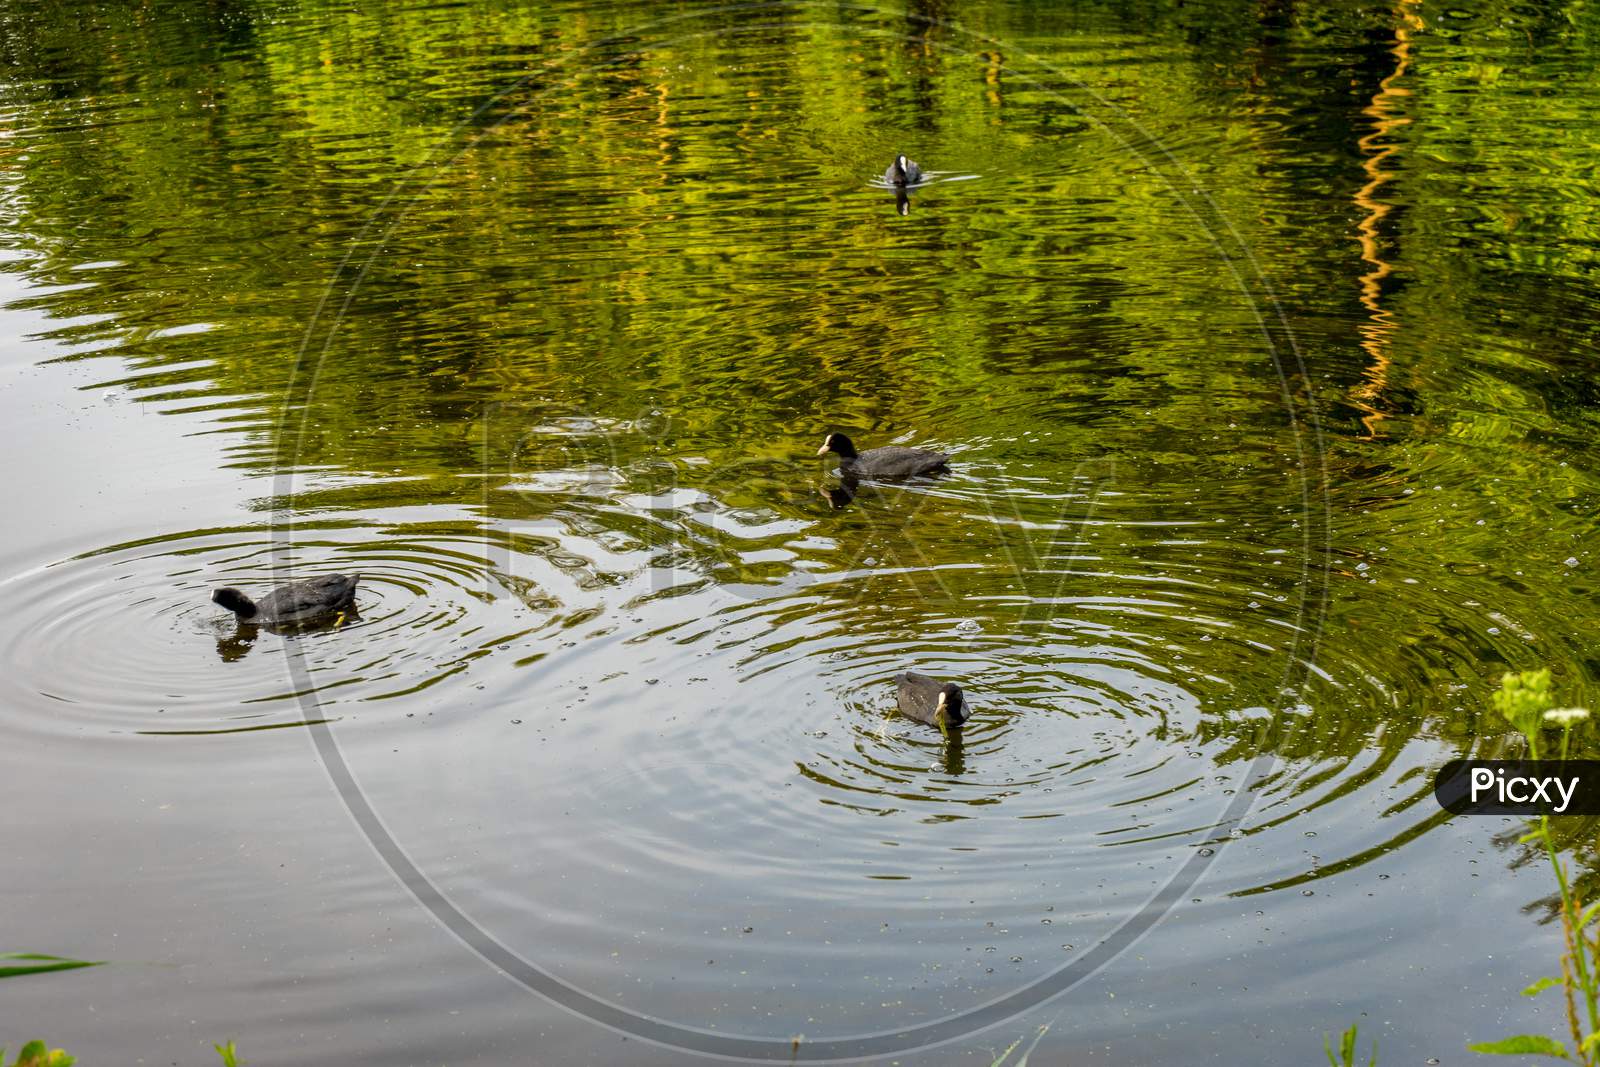 Ducks In A Pond At Haagse Bos, Forest In The Hague